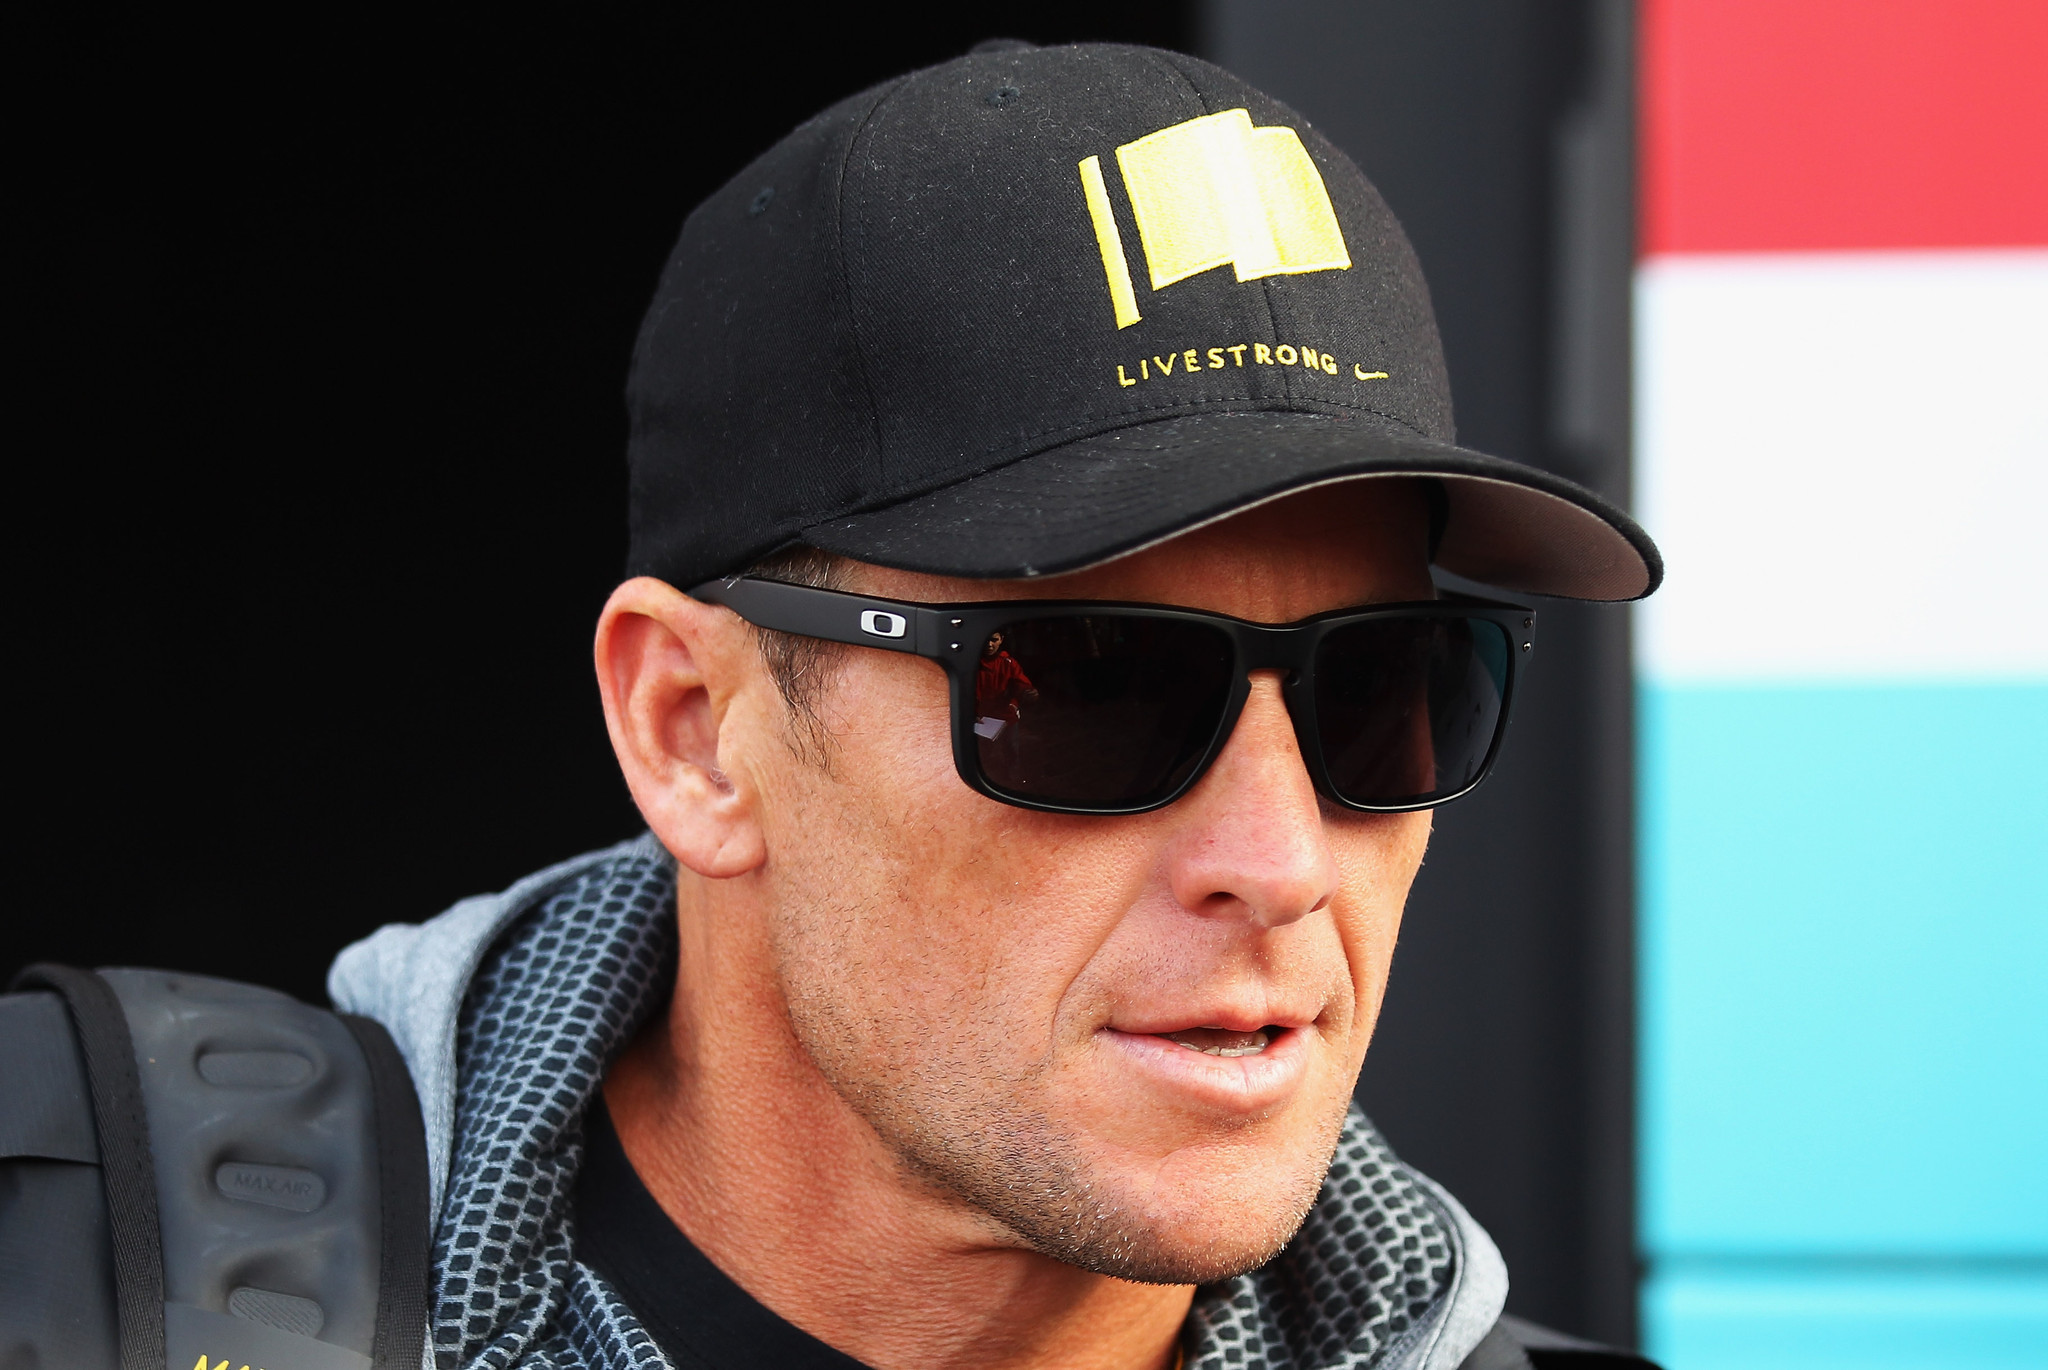 Lance Armstrong has agreed to pay the US Justice Department $5 million to settle a fraud case ©Getty Images